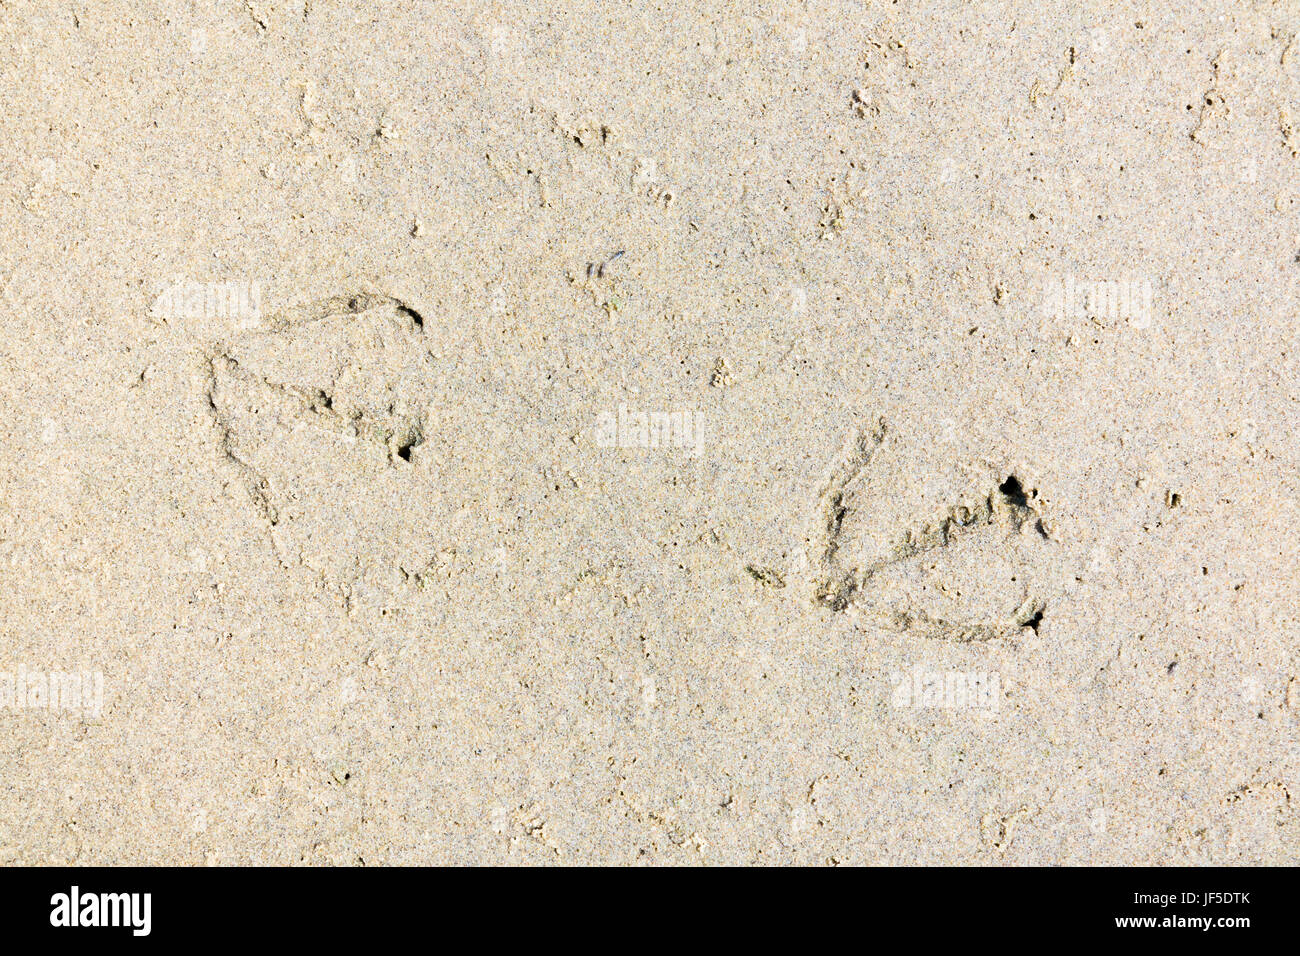 Trail of foot prints of walking seabirds in sand on beach, Netherlands Stock Photo